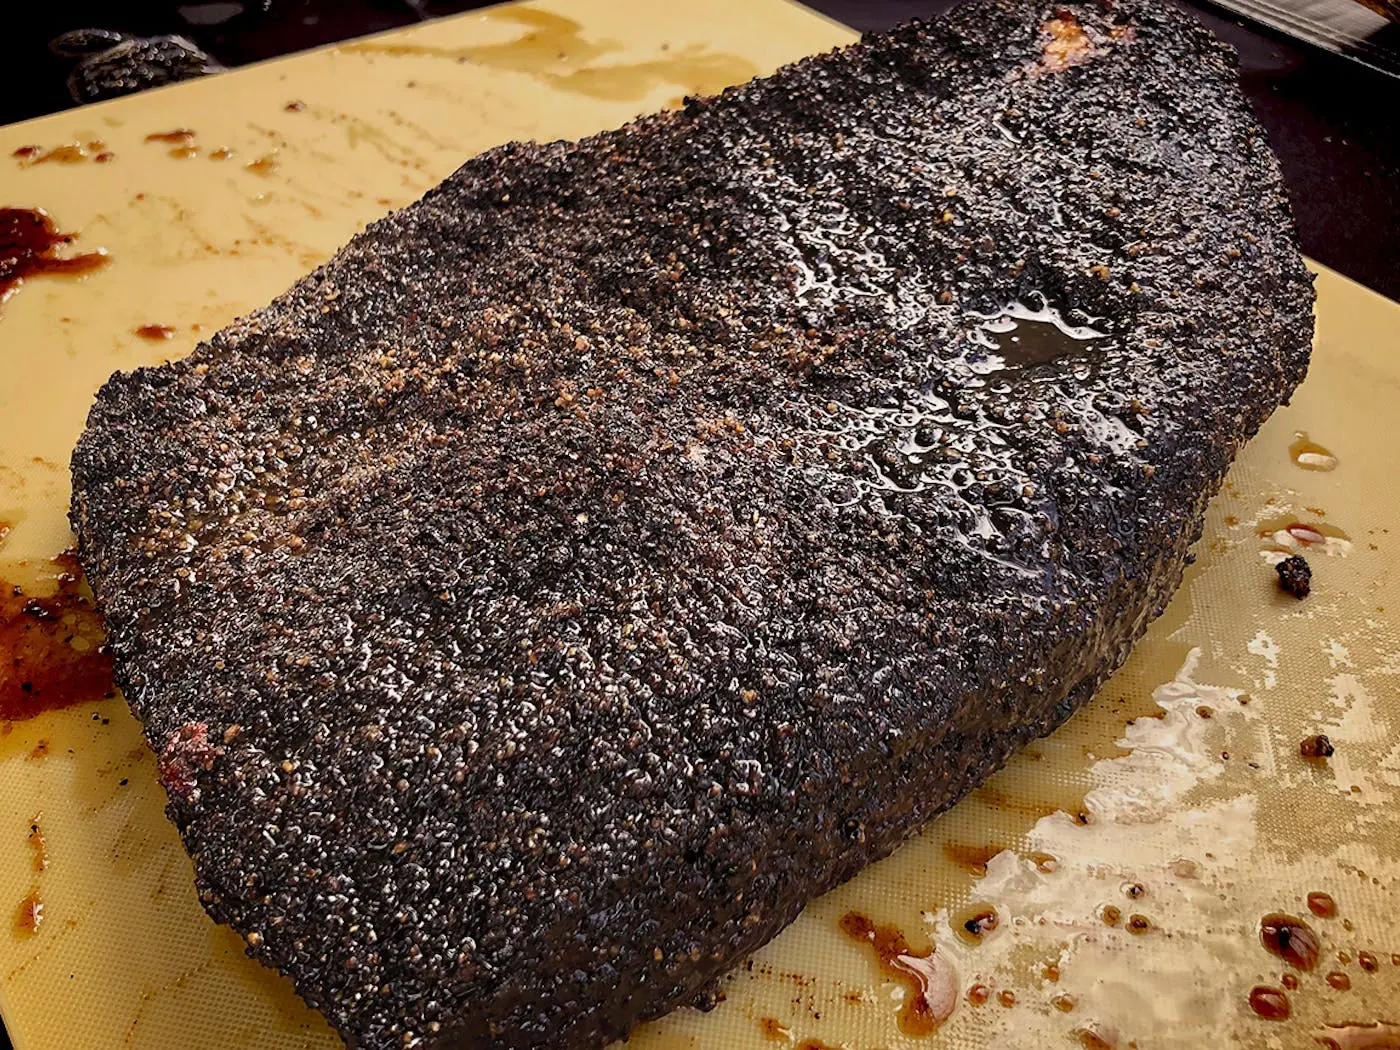 mail order smoked brisket - Can you send brisket in the mail